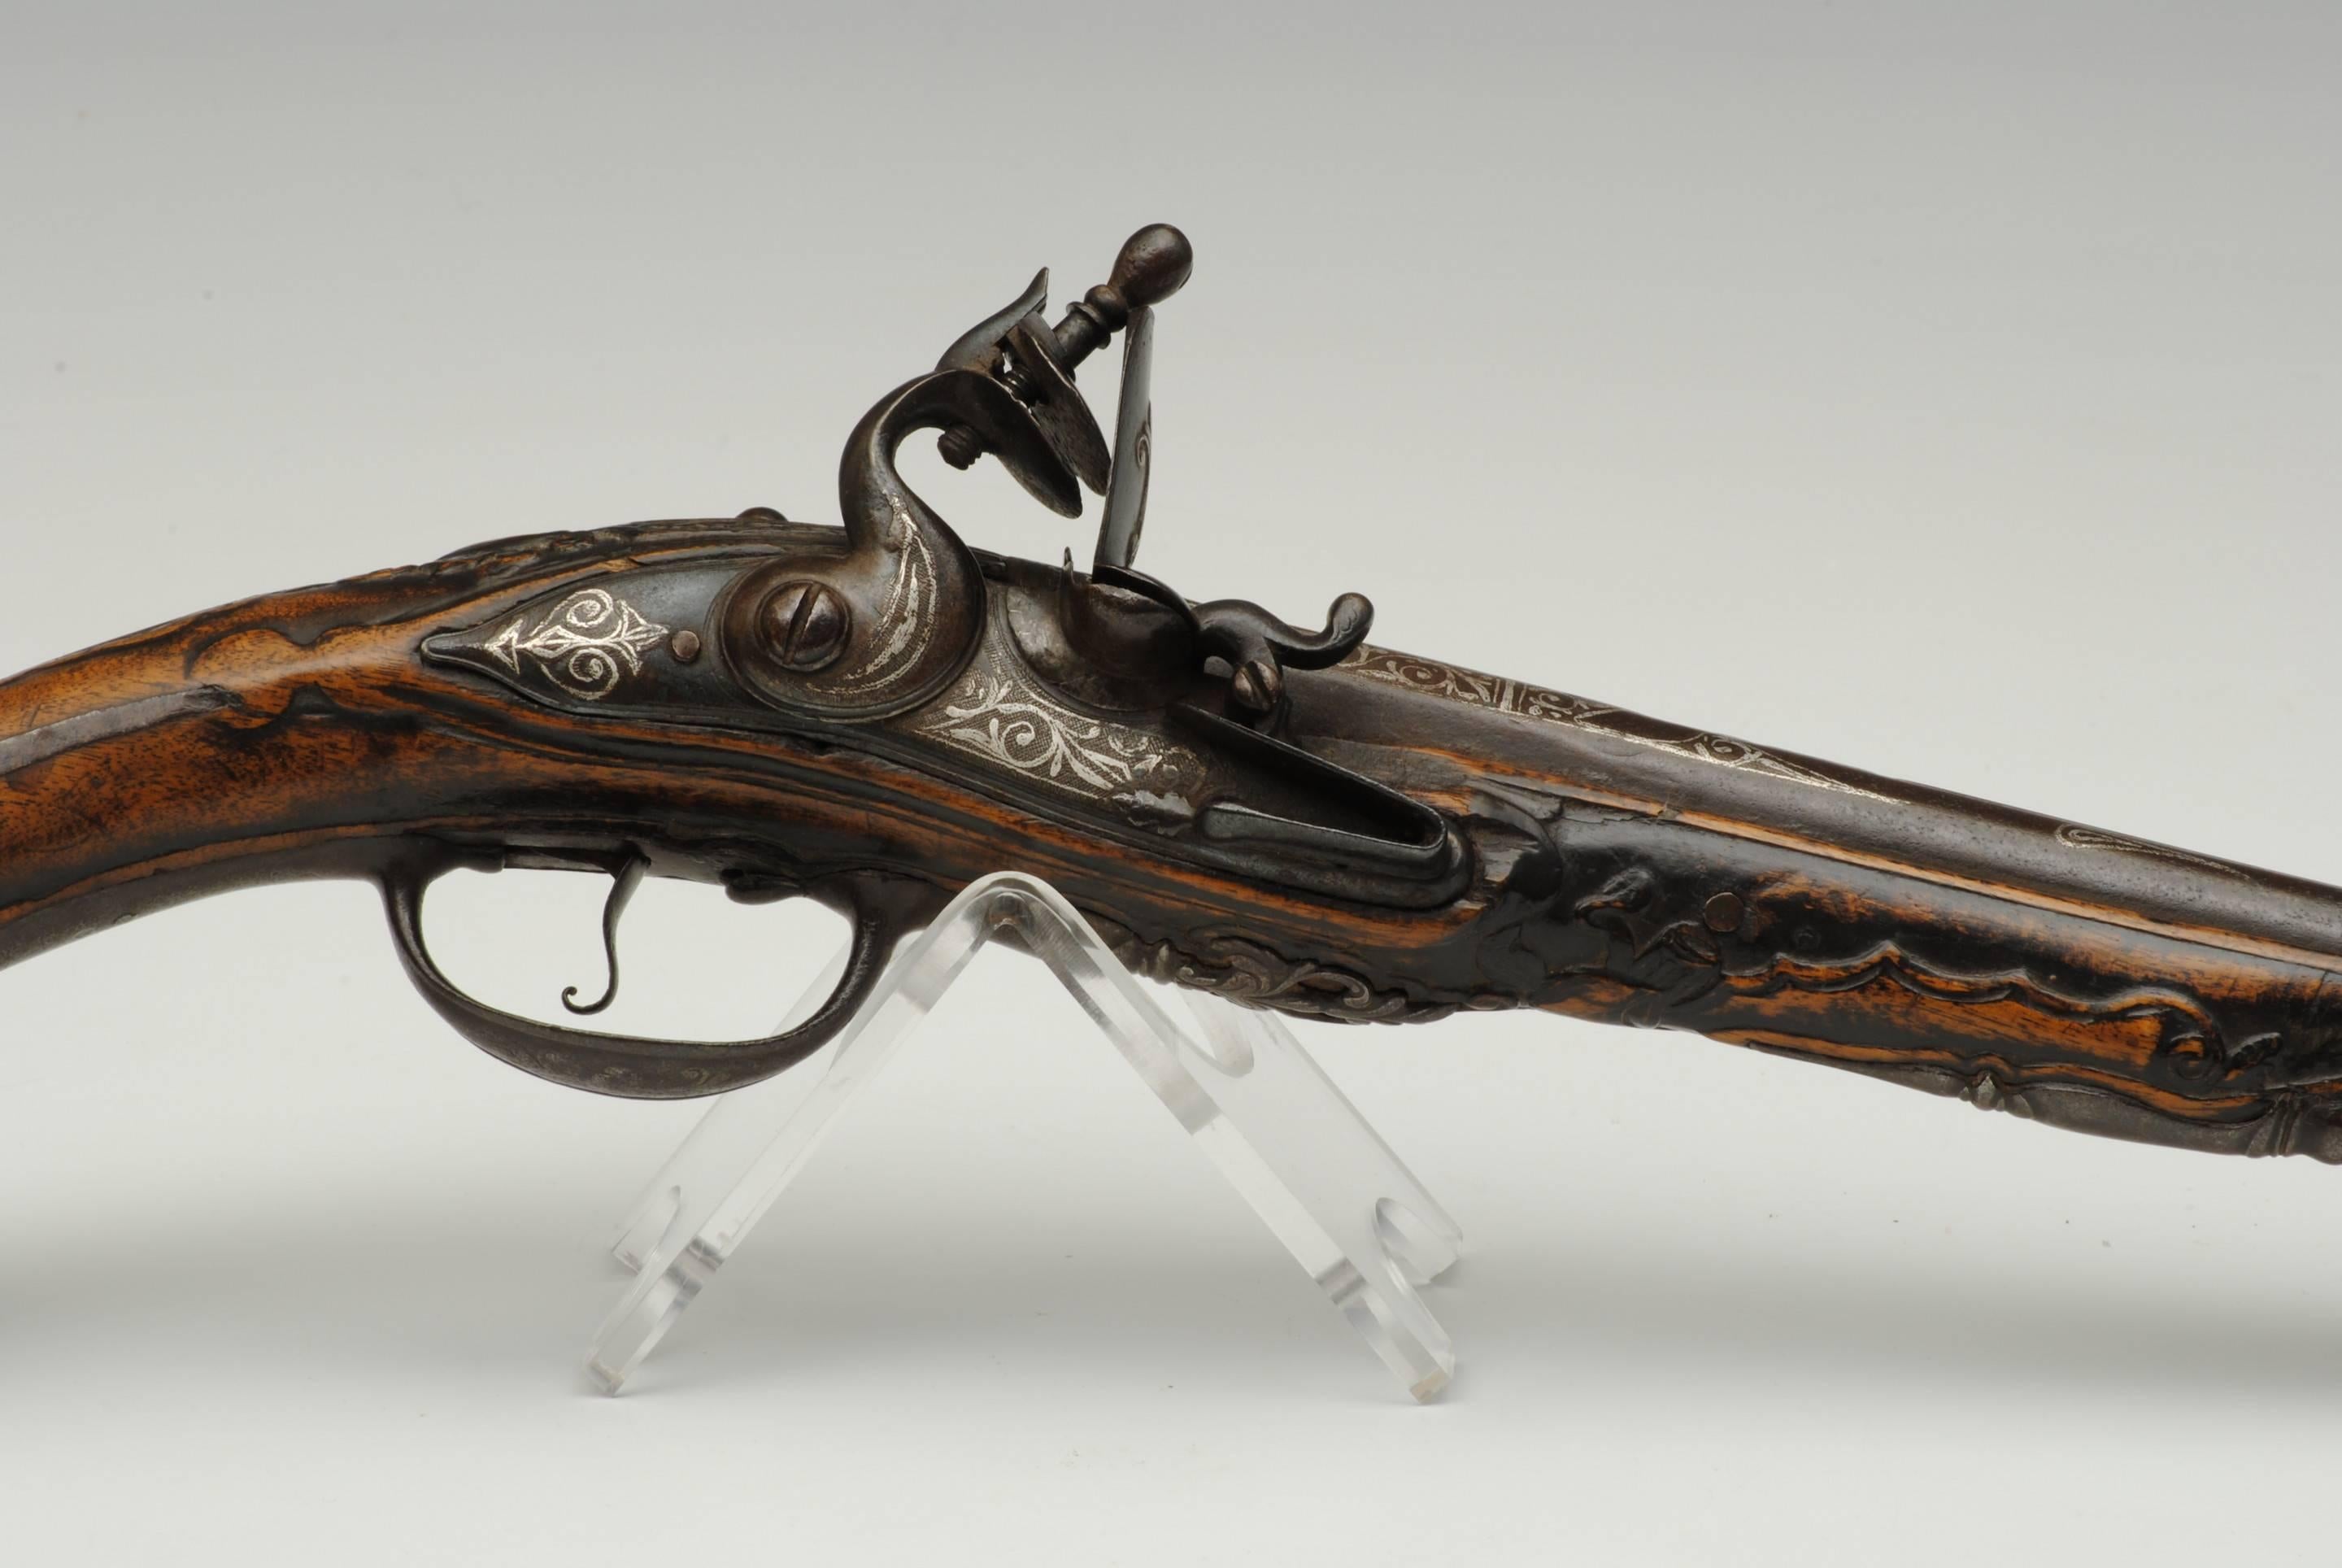 A good example of a Spanish flintlock pistol made for the Turkish market.